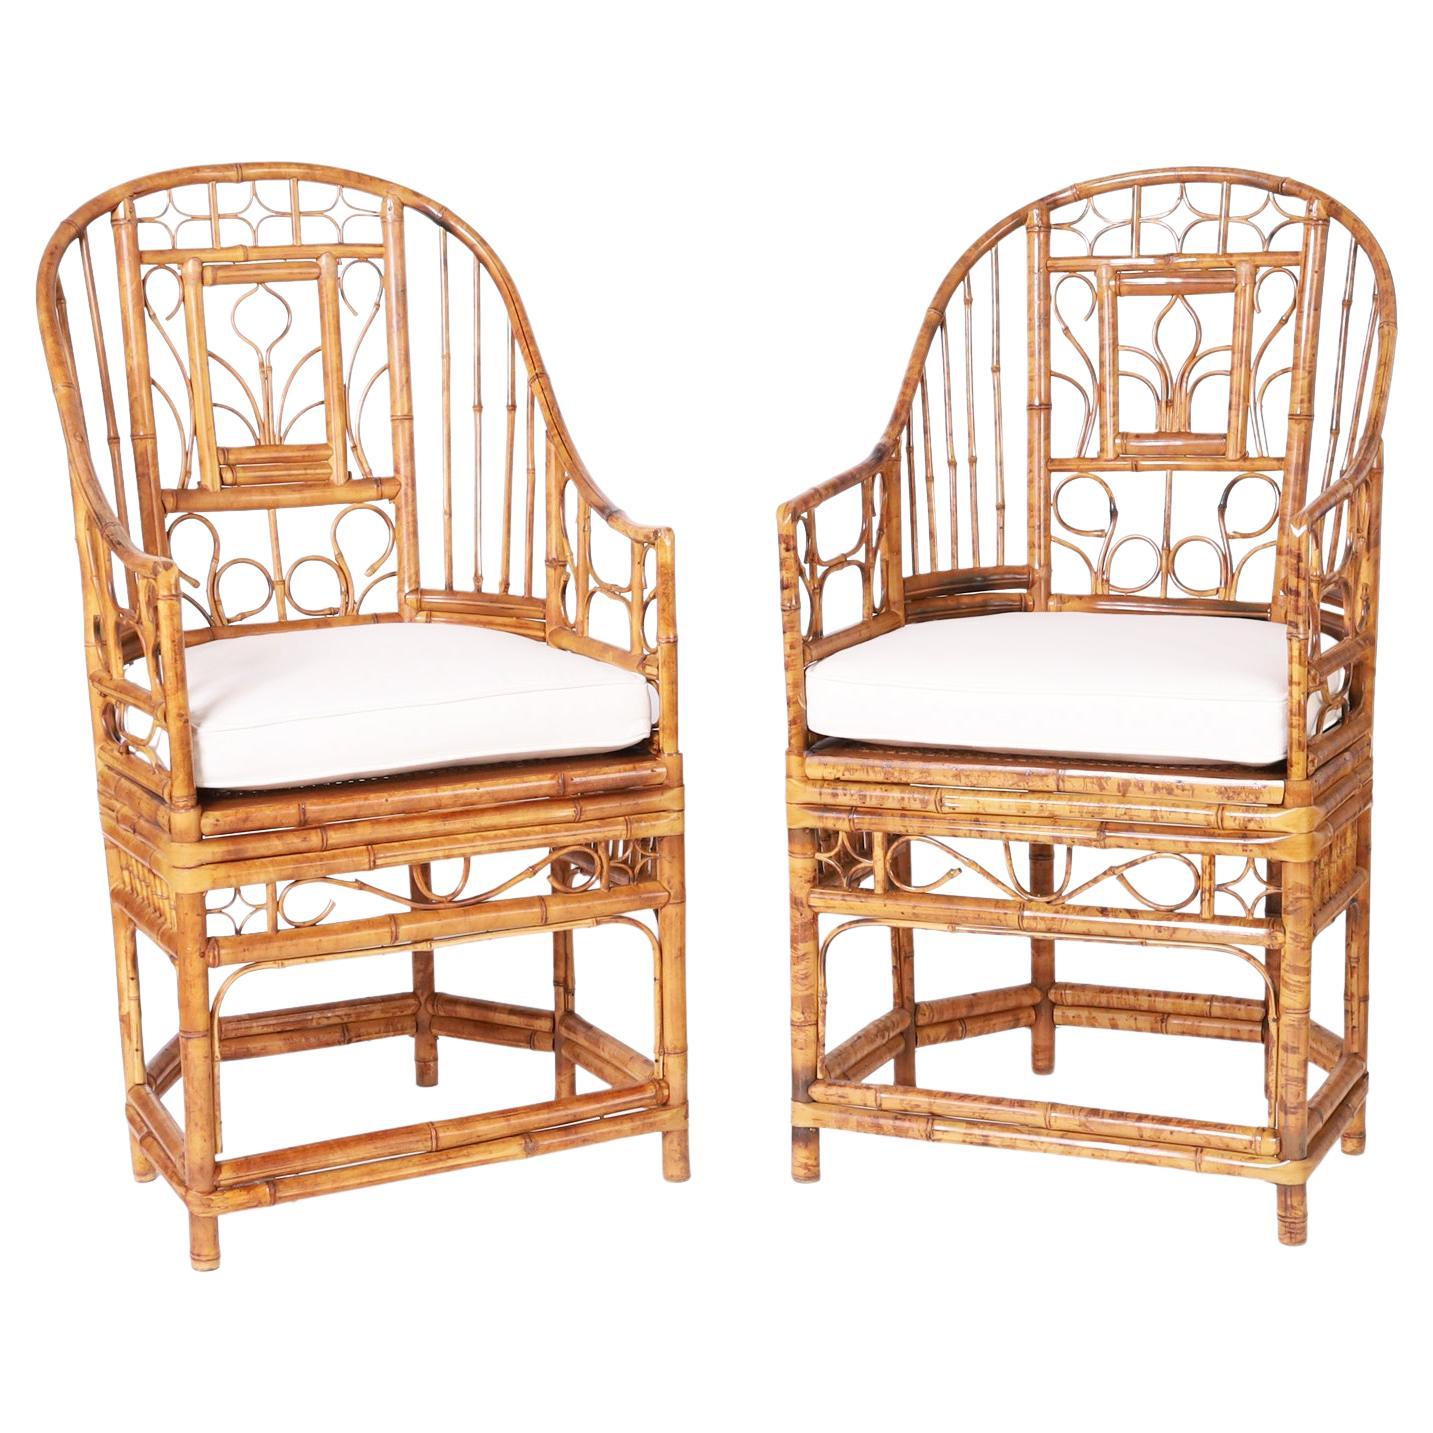 Near Pair of Vintage Brighton Pavilion Style Bamboo Chairs